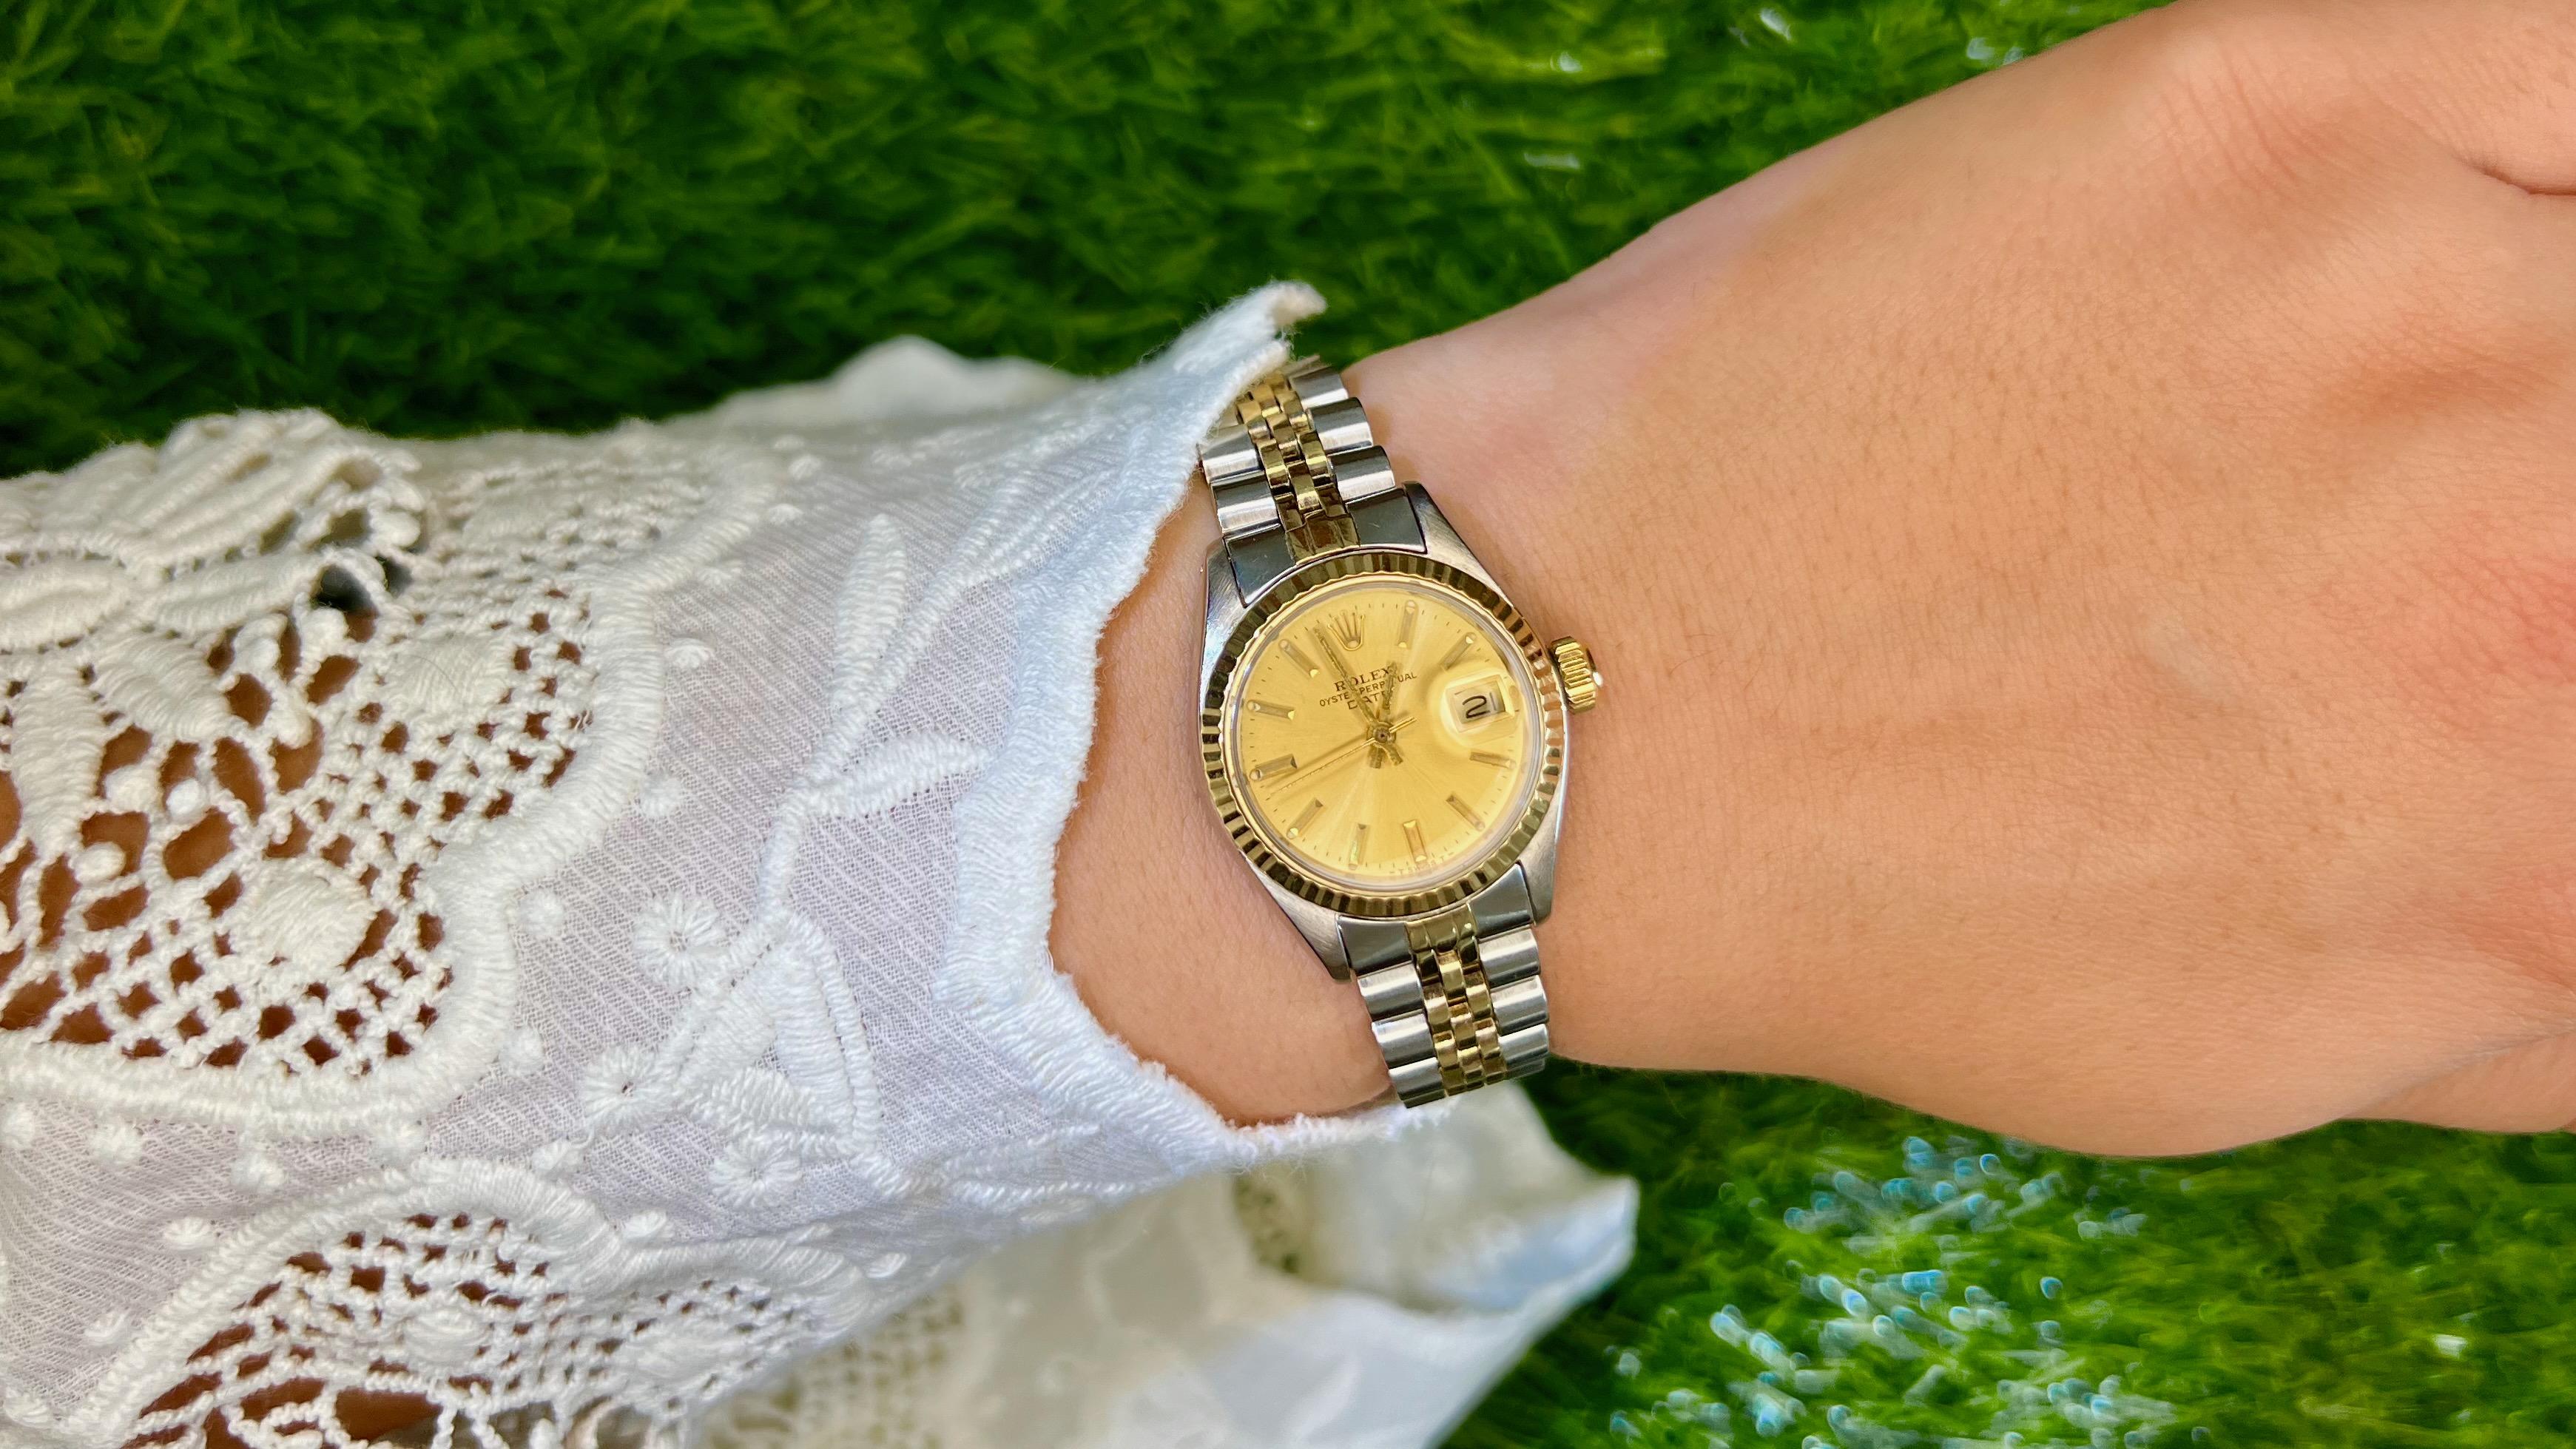 This is an authentic ROLEX Stainless Steel 18K Yellow Gold 28mm Oyster Perpetual Lady-Datejust Watch. Crafted from stainless steel and 18K yellow gold, this Rolex features an automatic movement with a date complication, gold dial, fluted bezel, and